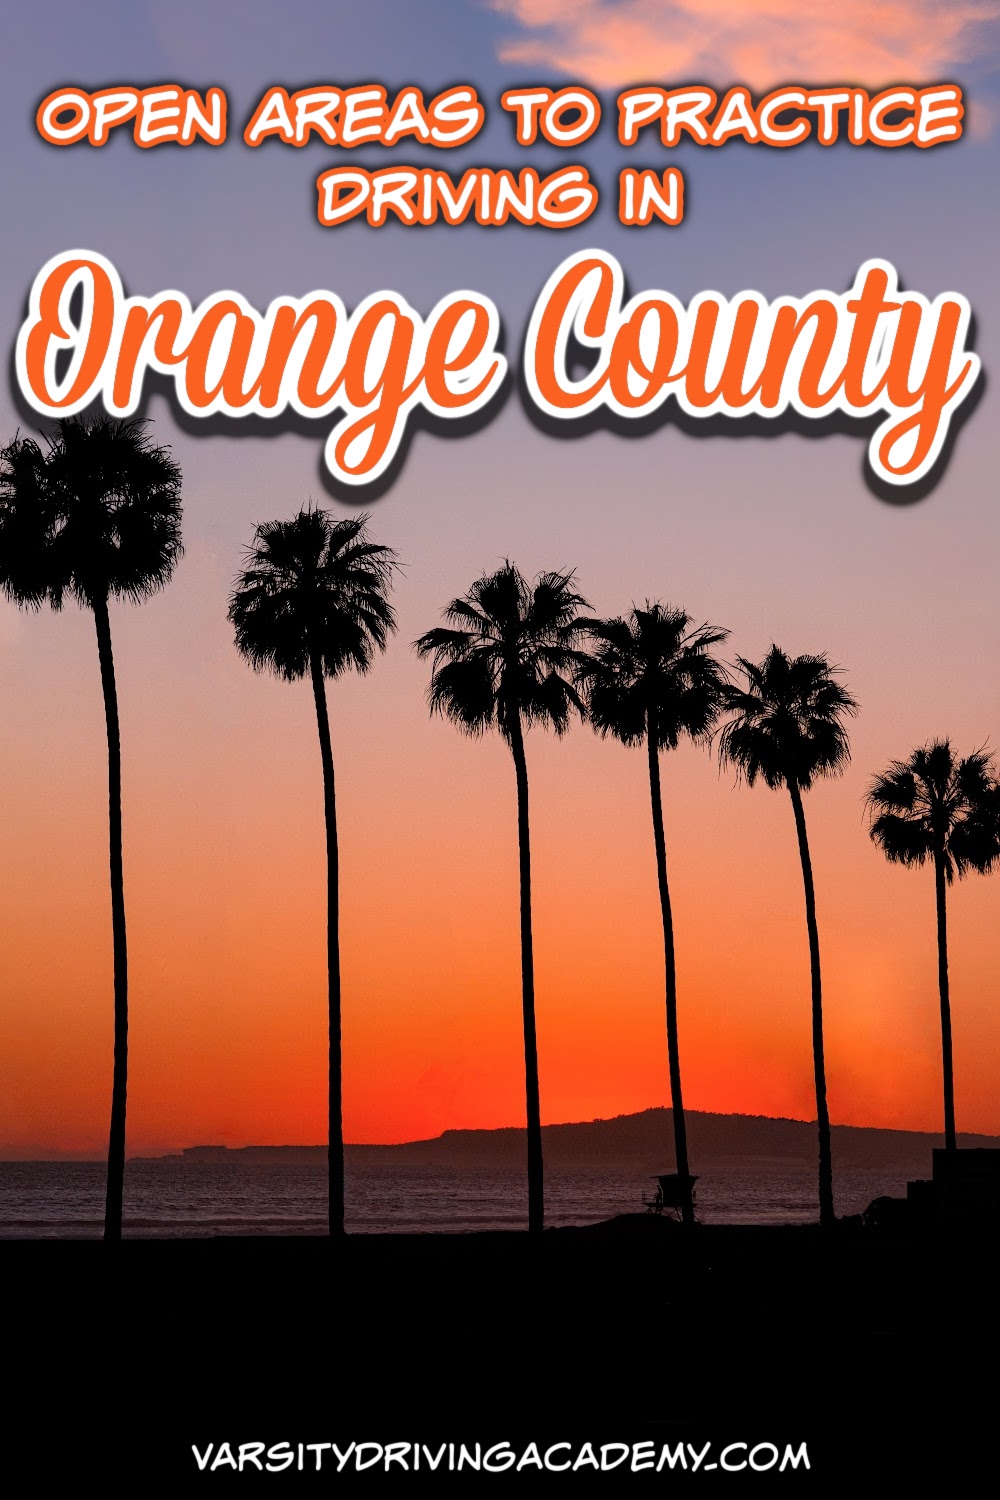 Finding open areas to practice driving in Orange County is the best way to learn how to drive and avoid getting into any accidents while doing so.